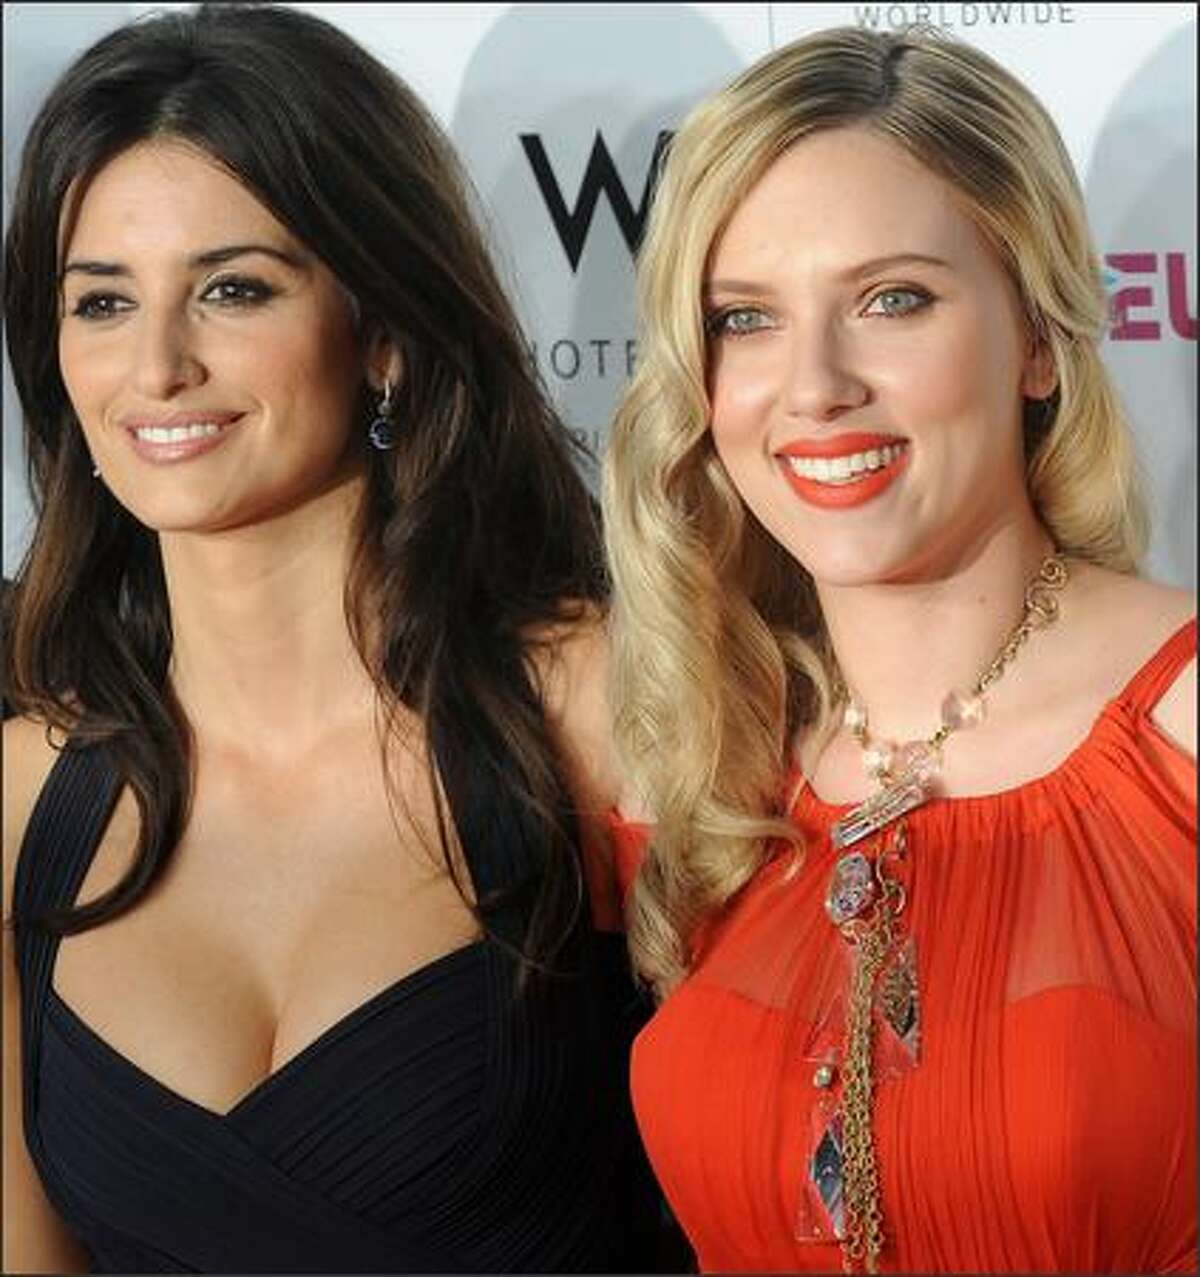 Cast members Penelope Cruz (L) and Scarlett Johansson arrive for the Los Angeles premiere of Vicky Cristina Barcelona at the Mann Village Theatre in Los Angeles.